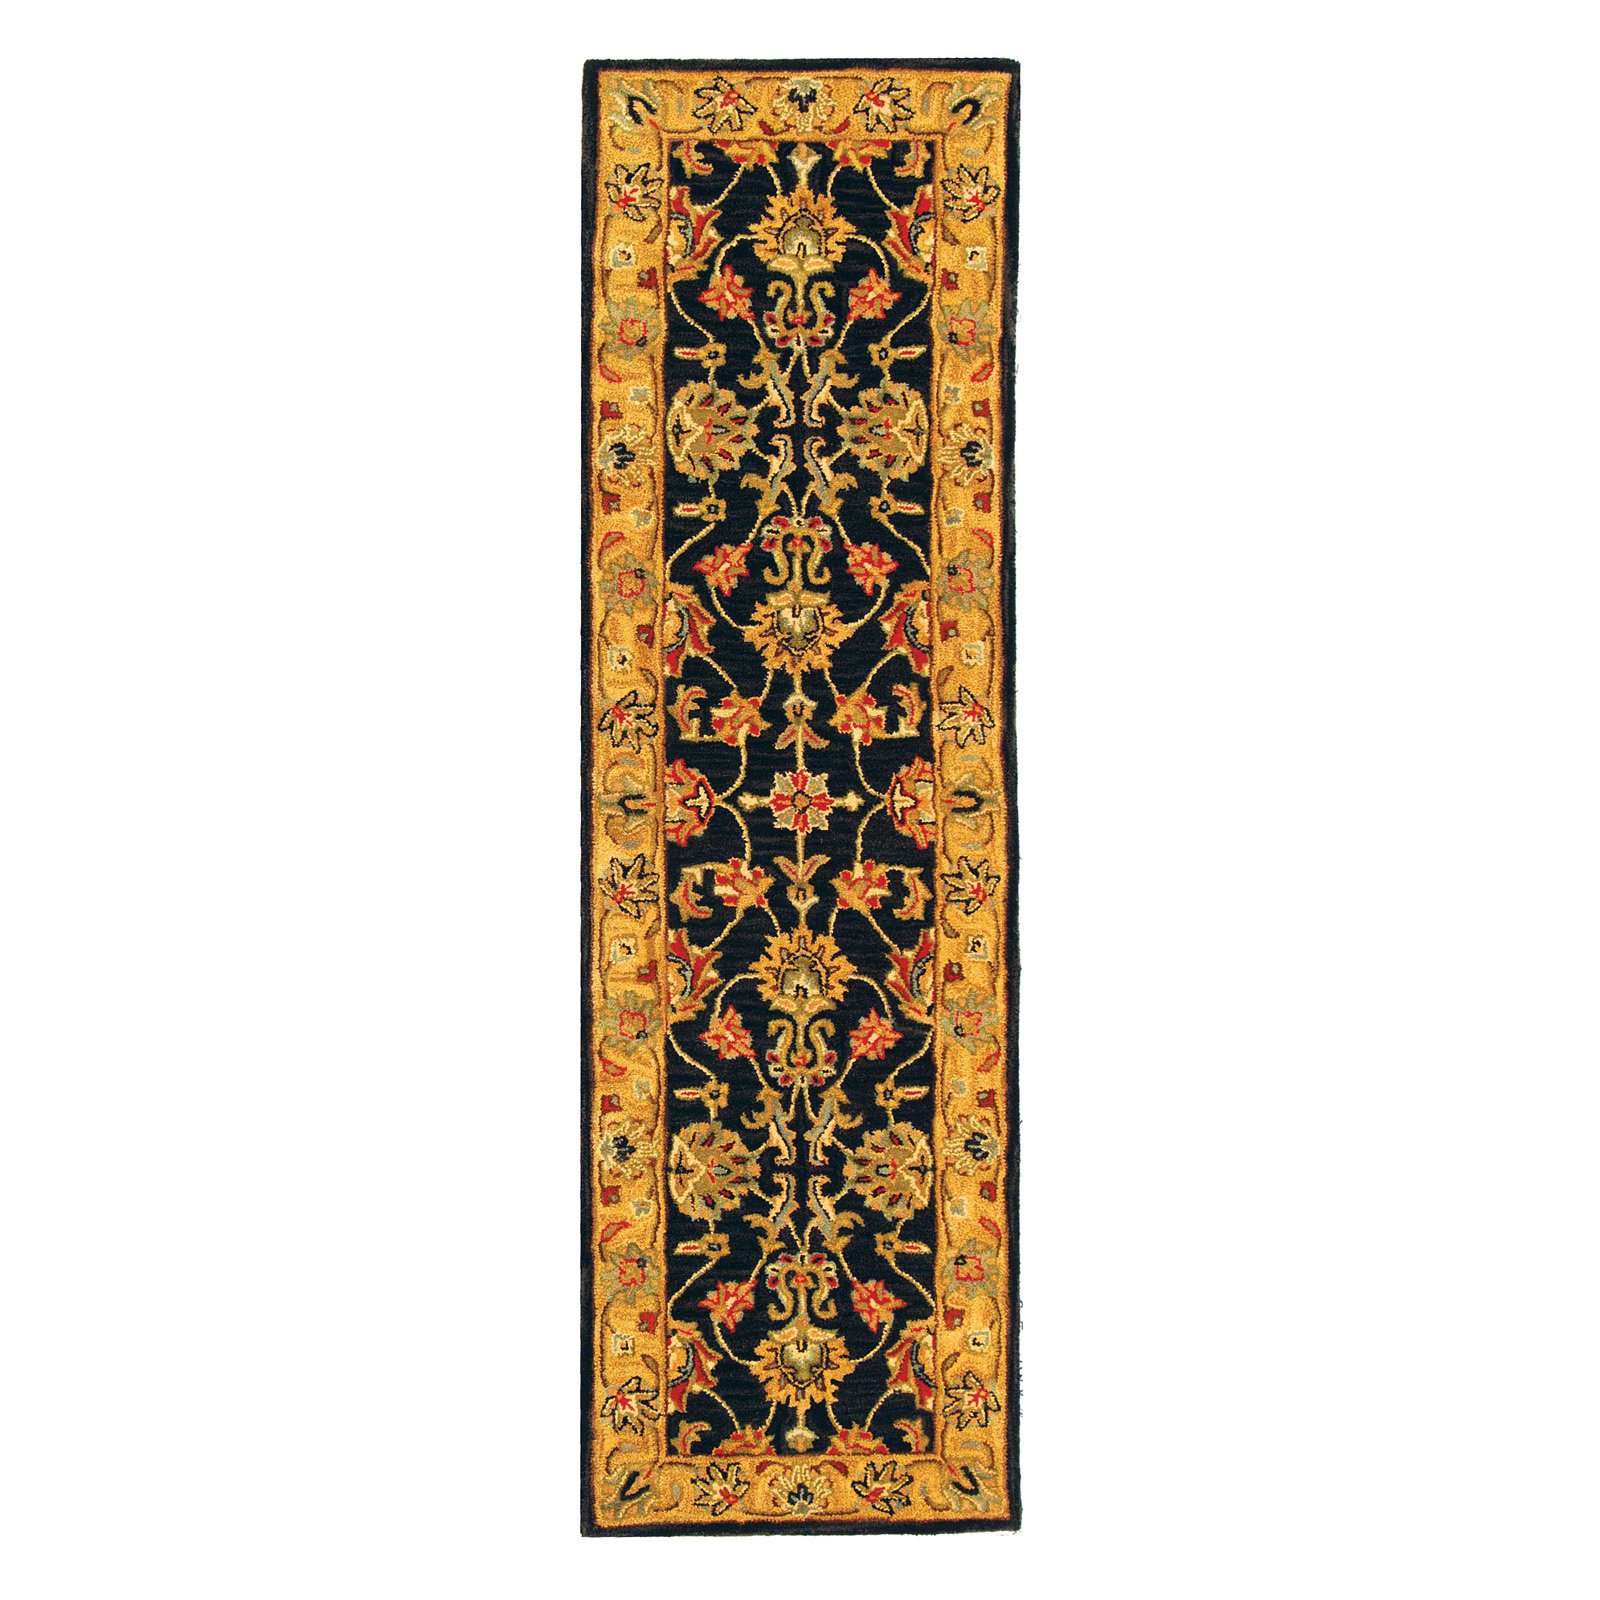 SAFAVIEH Heritage Regis Traditional Wool Area Rug, Charcoal/Gold, 3' x 5' - image 4 of 10